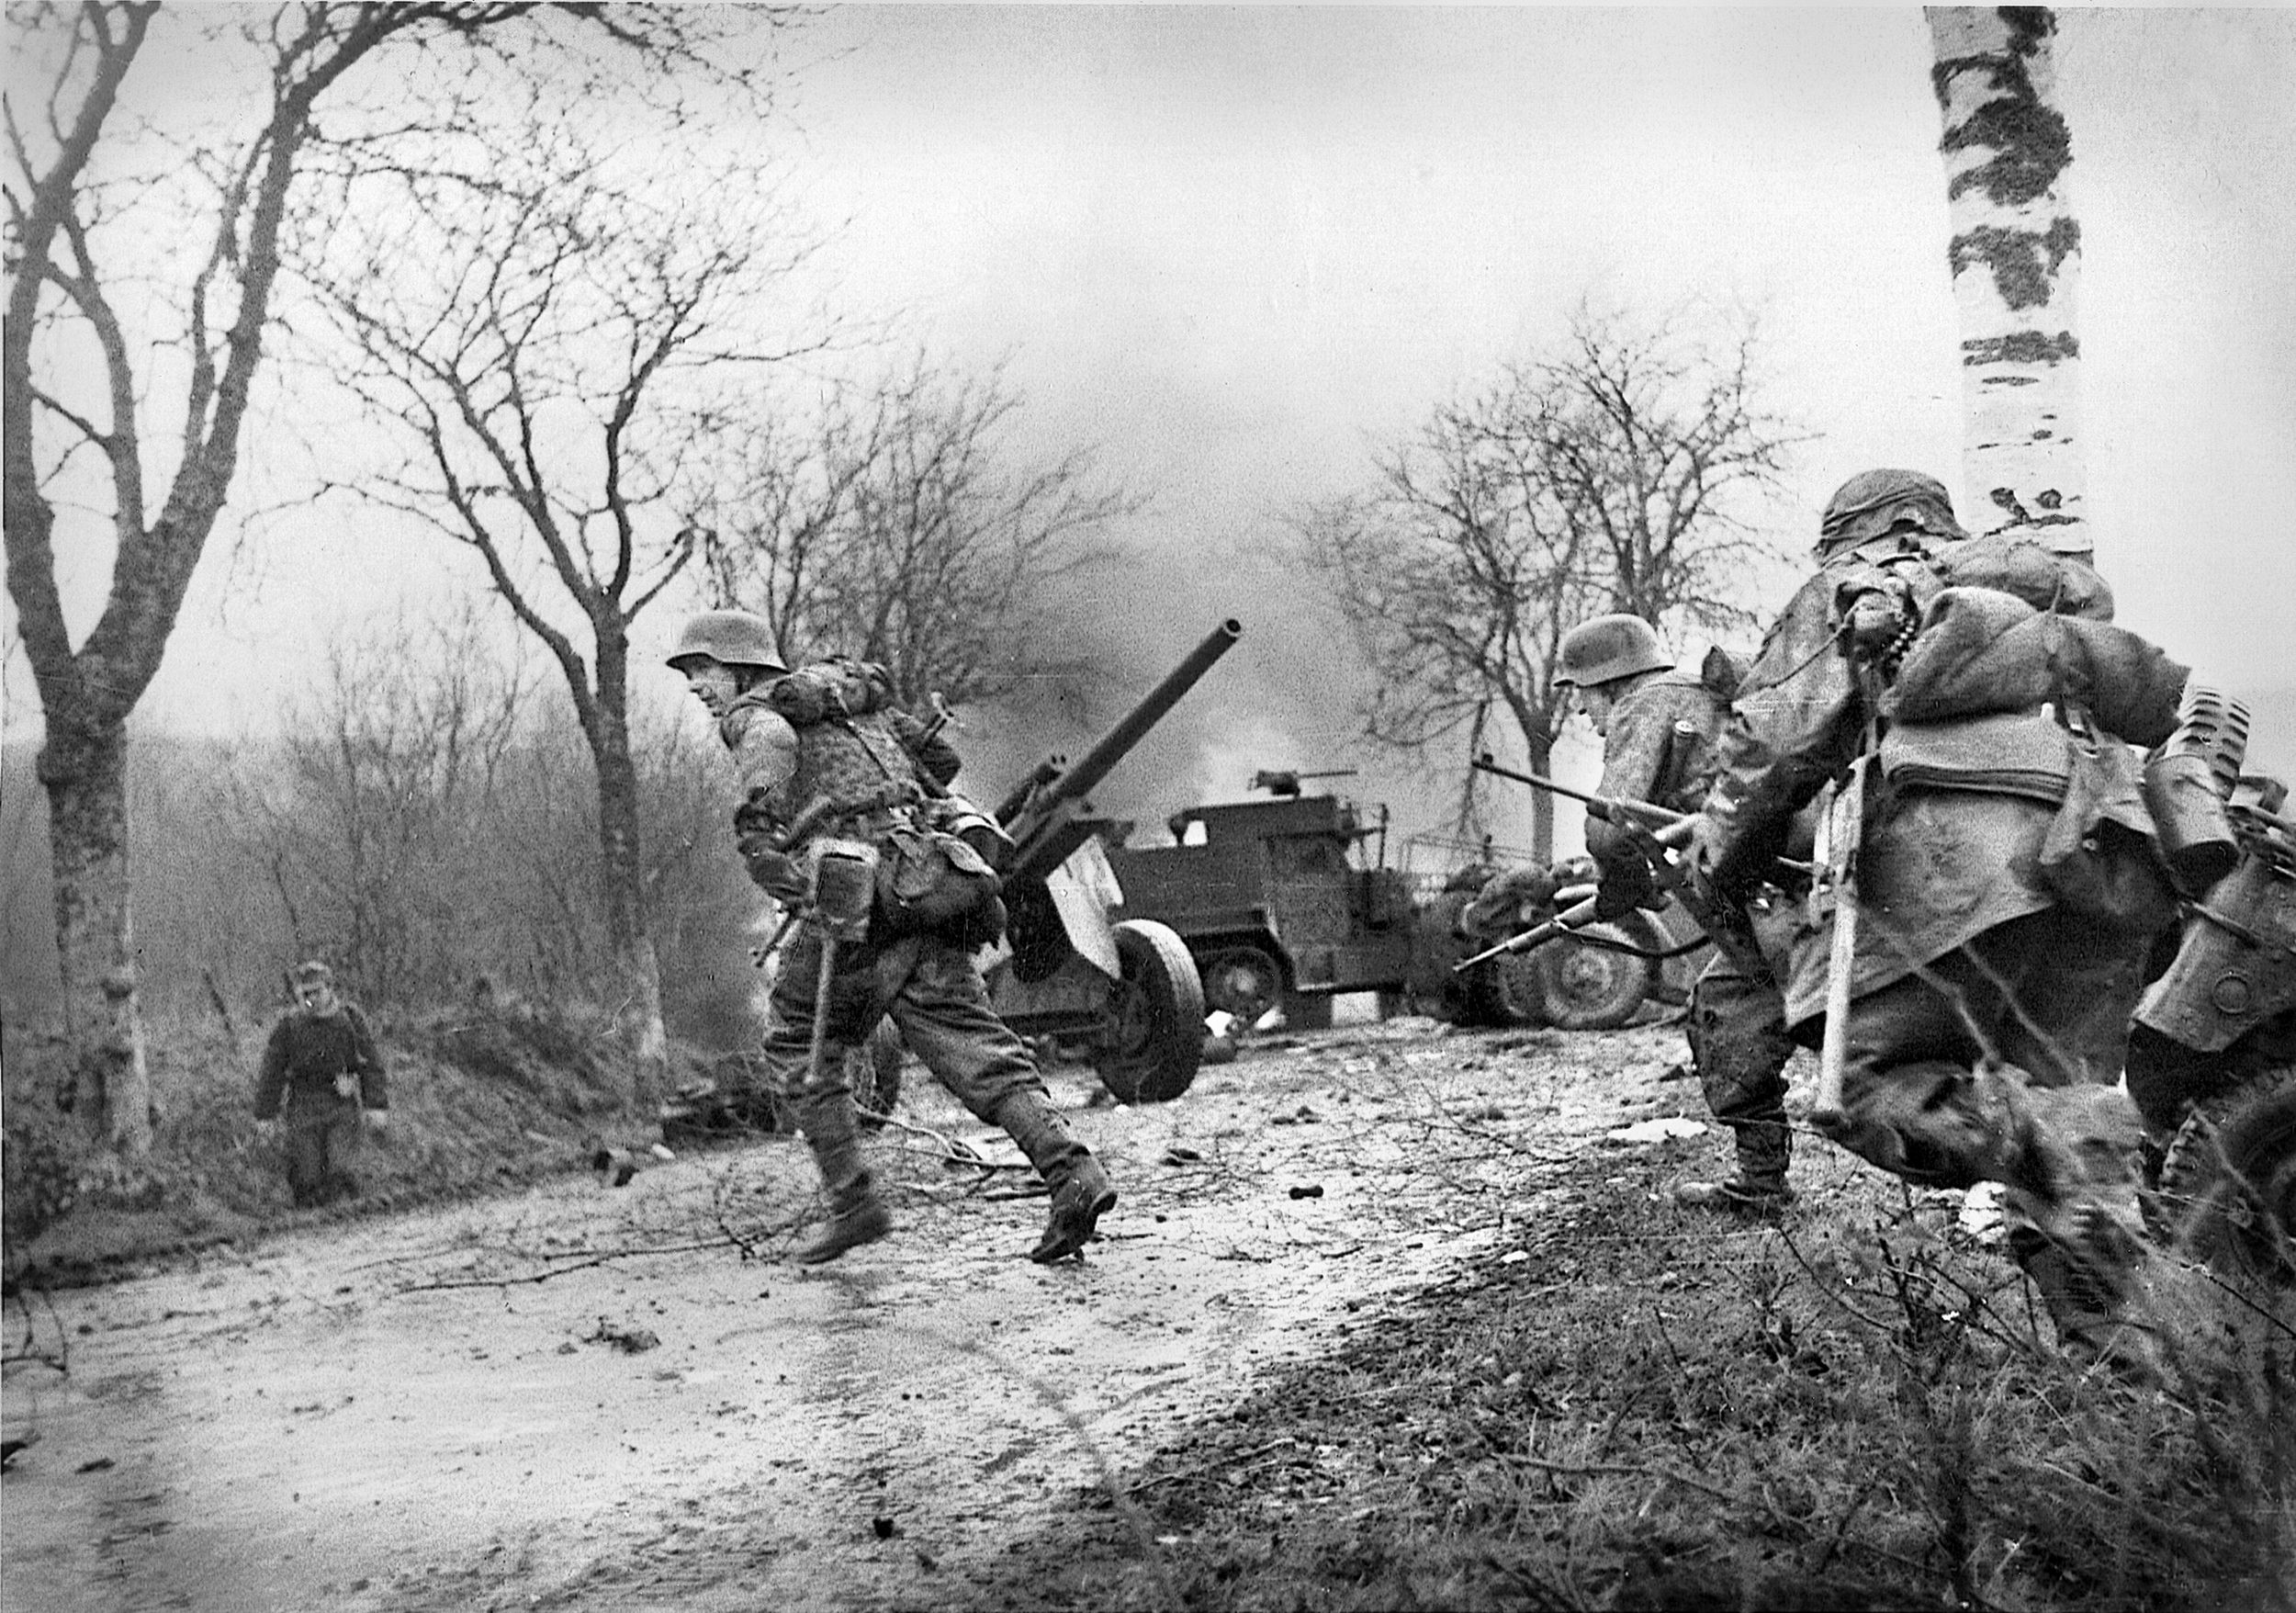 German soldiers dash across a Belgian road, reenacting their attack for German cameramen after ambushing an American convoy in the first days of the Ardennes offensive. Peiper’s men had several encounters with U.S. units while on their drive to the Meuse River.